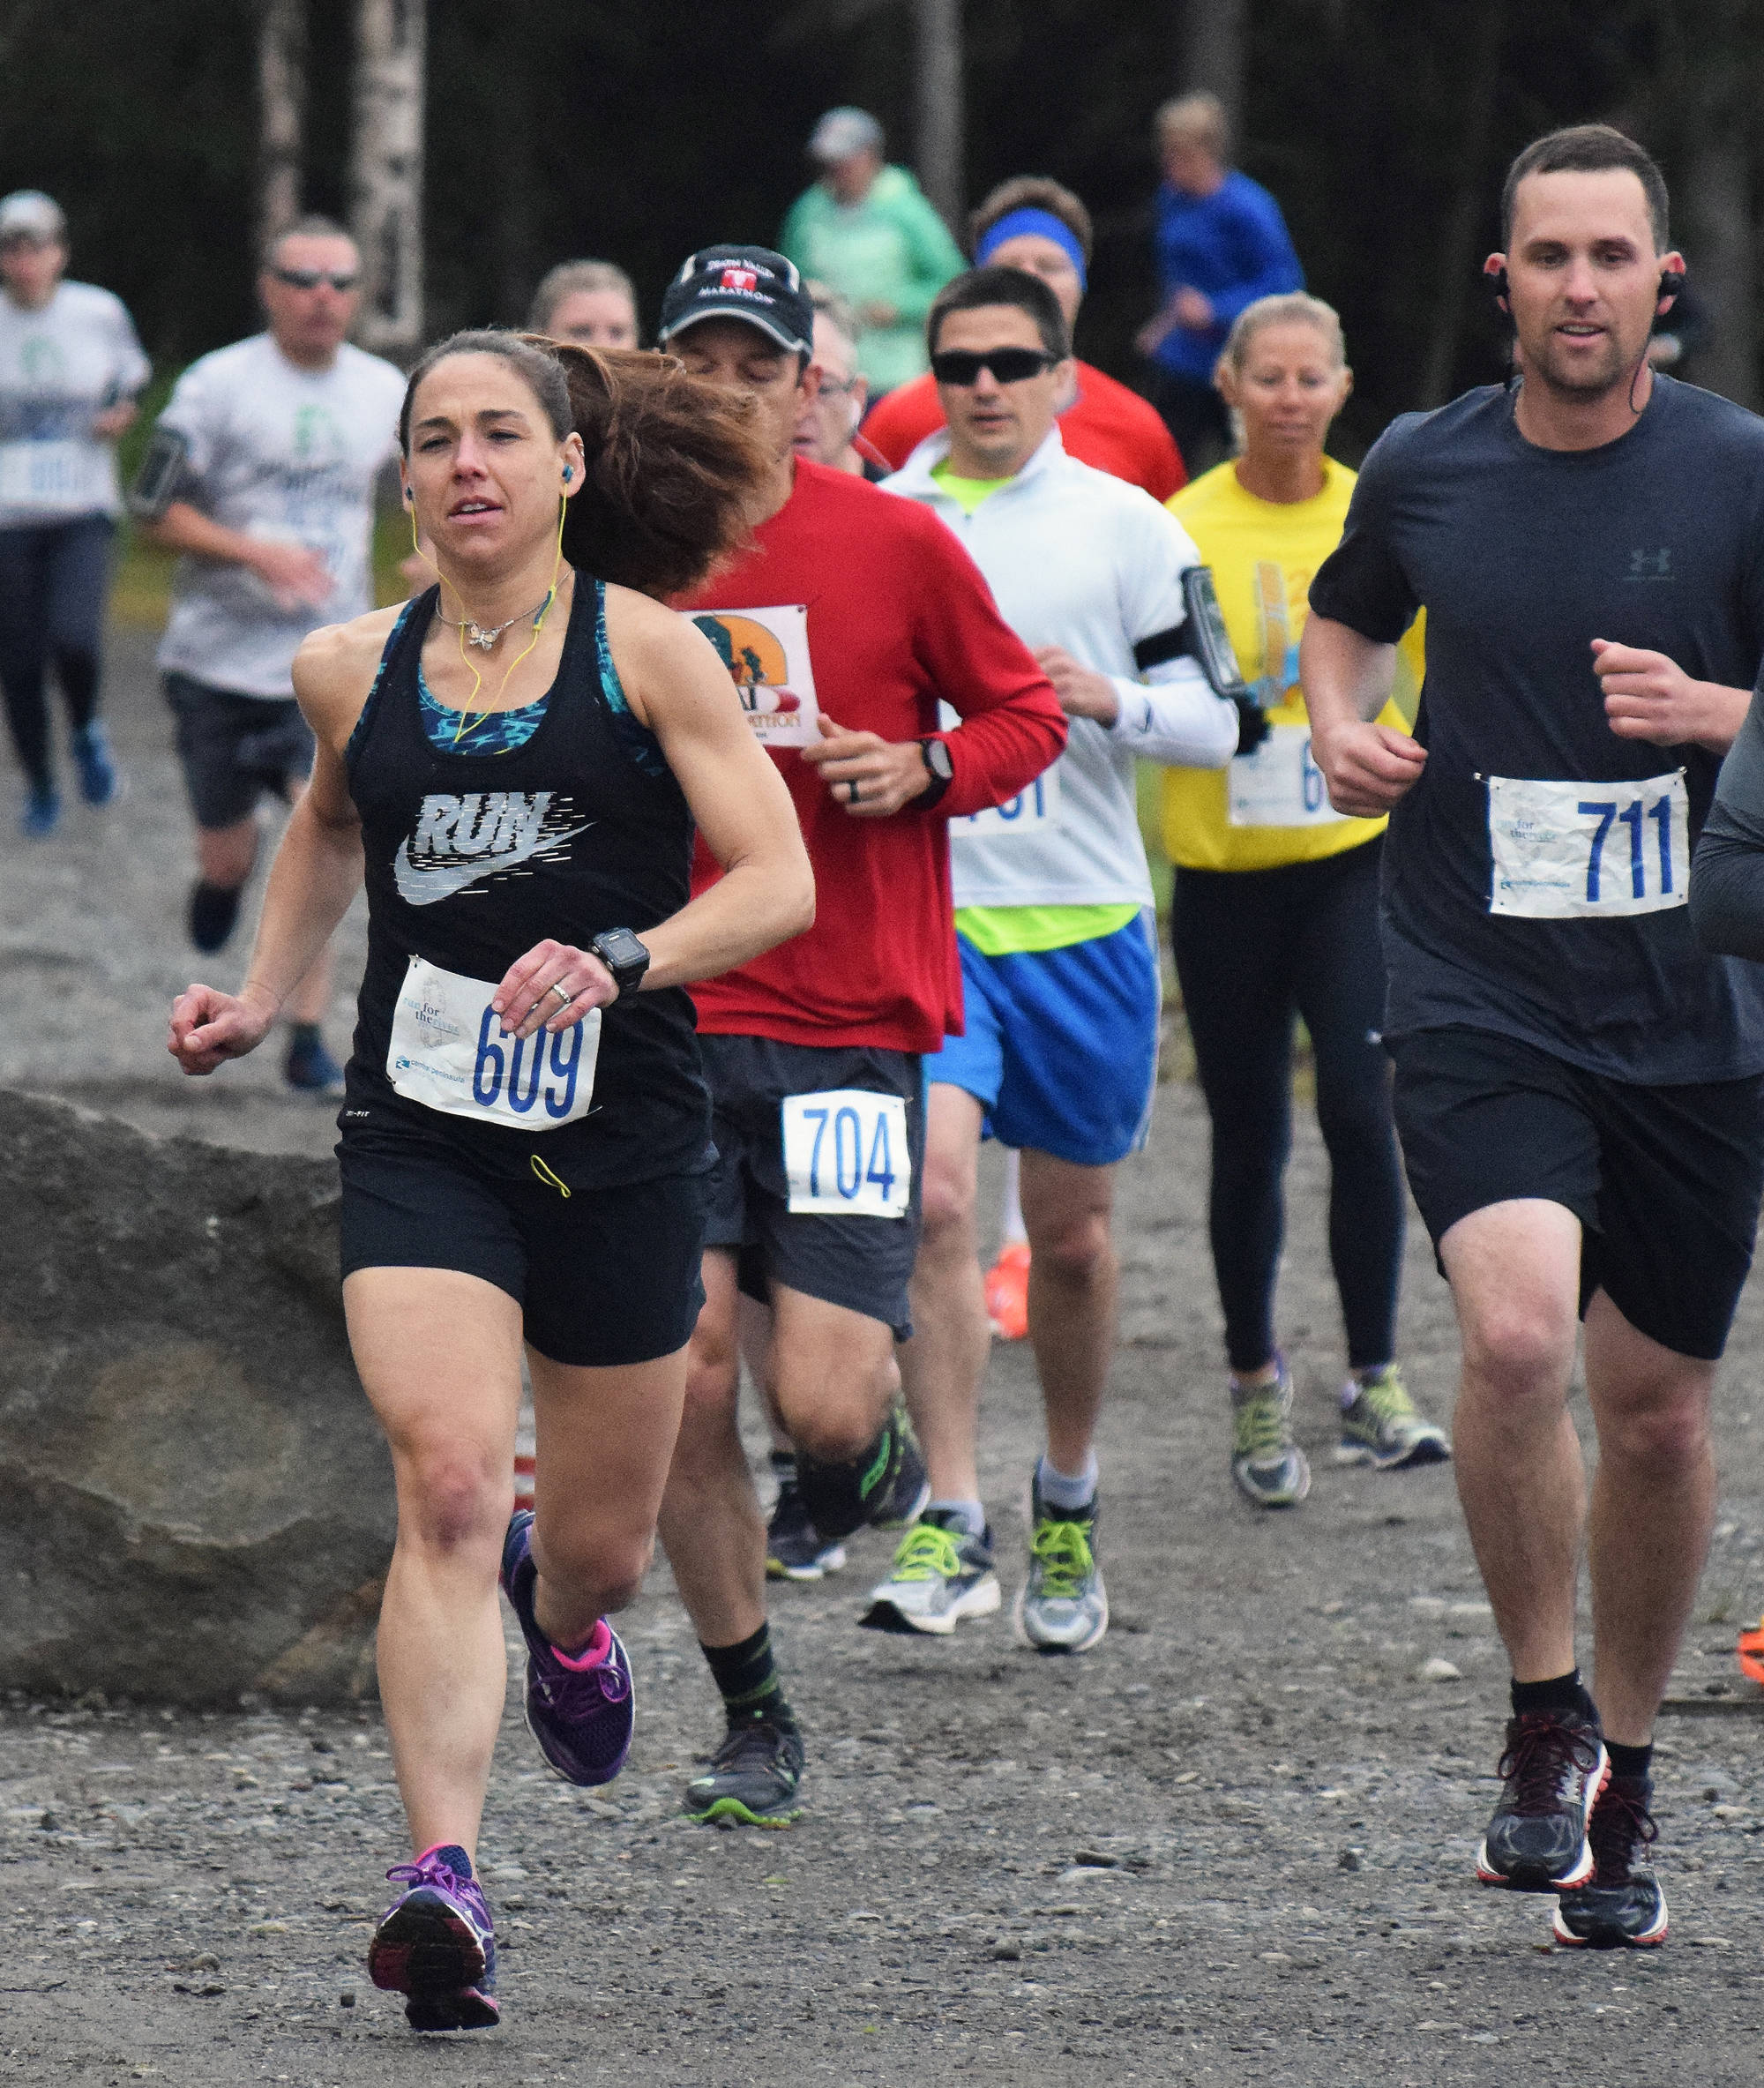 Women’s Run for the River 10-mile runner-up Heather Moon (609) leads a pack of racers out onto the course Saturday morning in Soldotna, with women’s 10-mile race winner Bethany Tietz (in yellow shirt) following closely. (Photo by Joey Klecka/Peninsula Clarion)